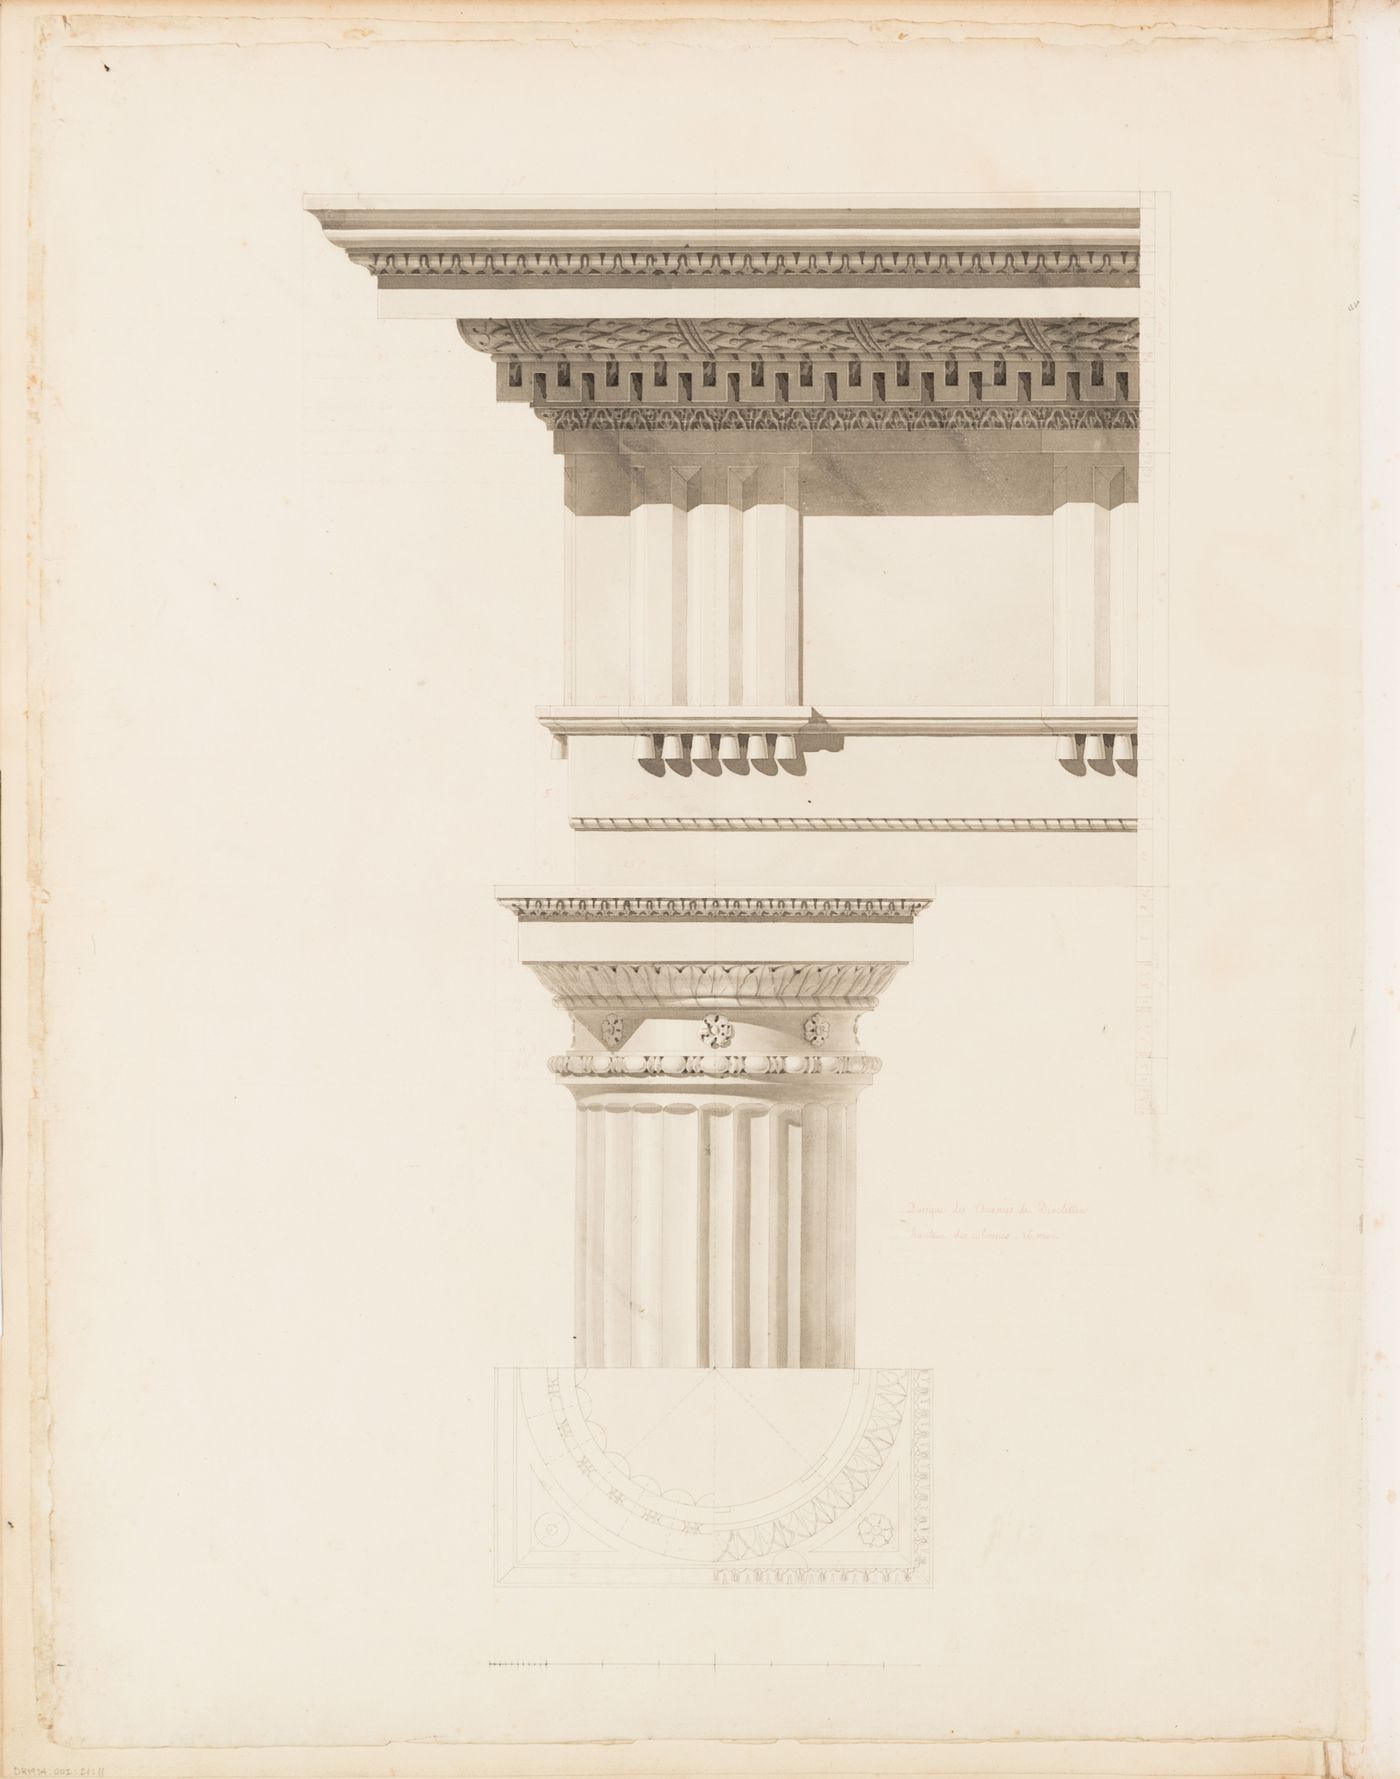 Elevation of a Doric shaft, capital, and entablature from the Terme di Diocleziano, Rome, with plan details of the capital